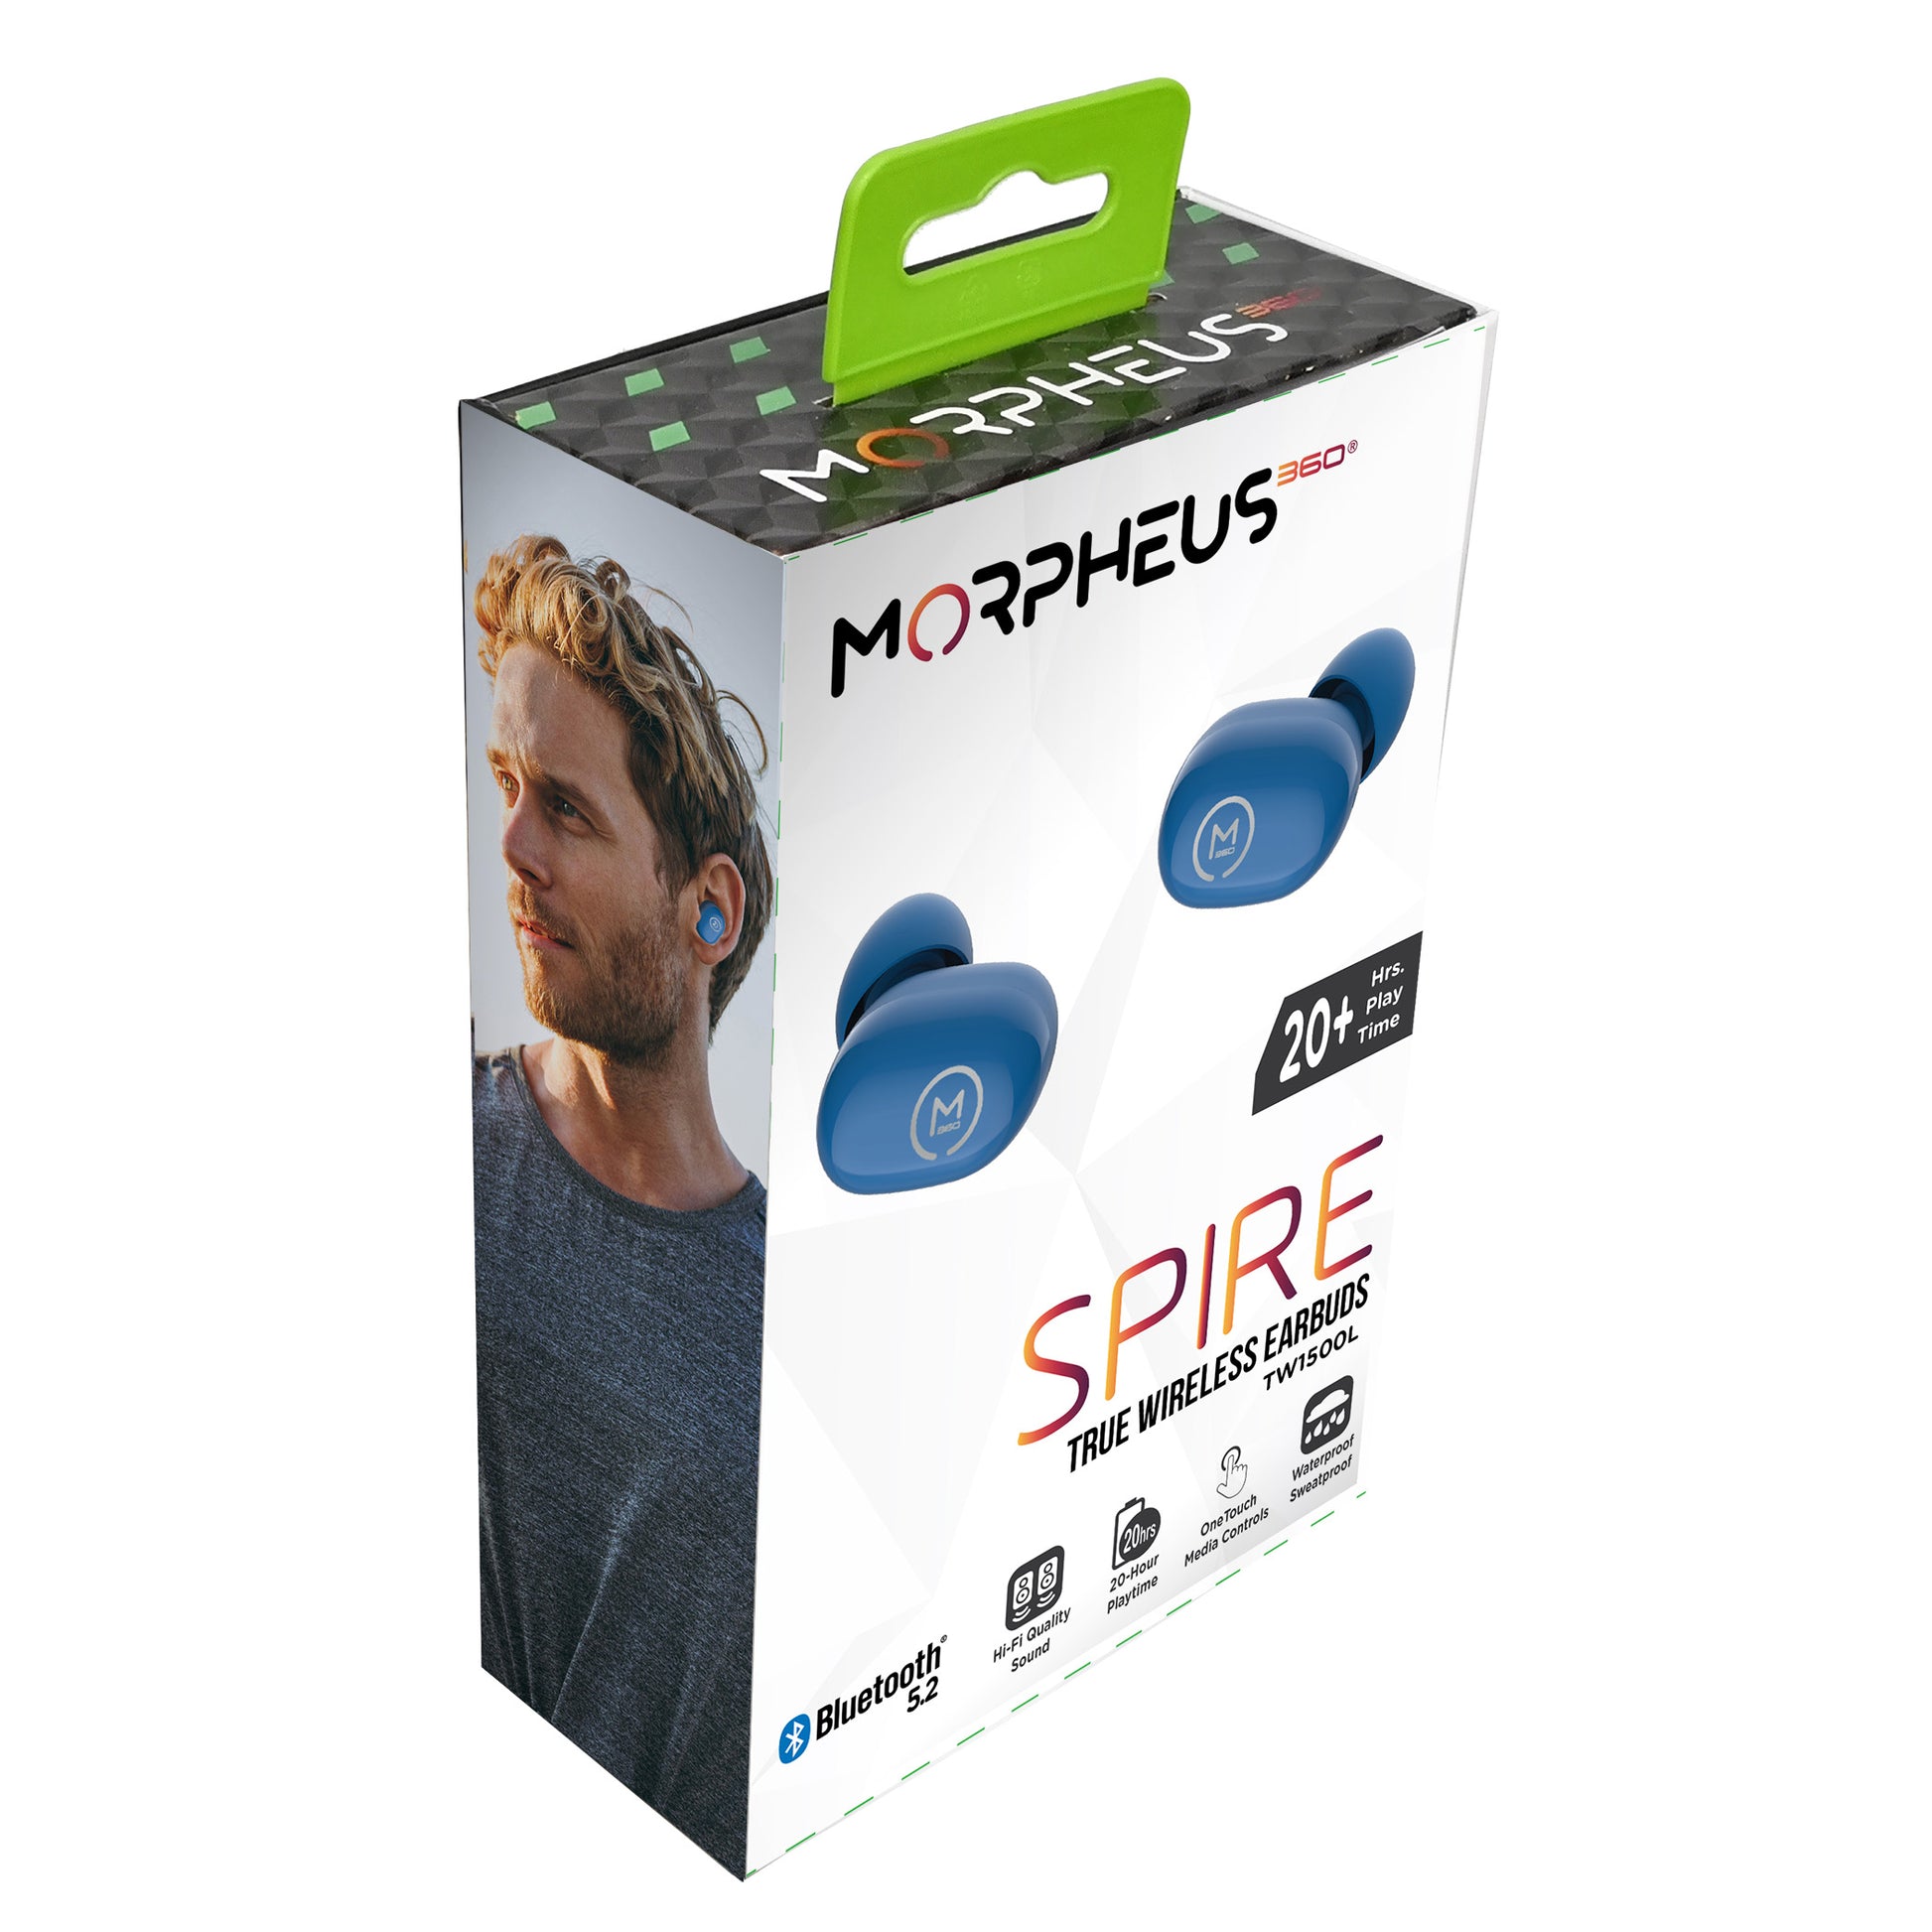 Photo of Morpheus 360 Spire True Wireless Earbuds Retail packing, Blue left and right earbuds with features: Bluetooth 5.2, 20+ Hours of Playtime, Hi-Fi Quality Sound, One Touch Media Controls, Waterproof/Sweatproof.